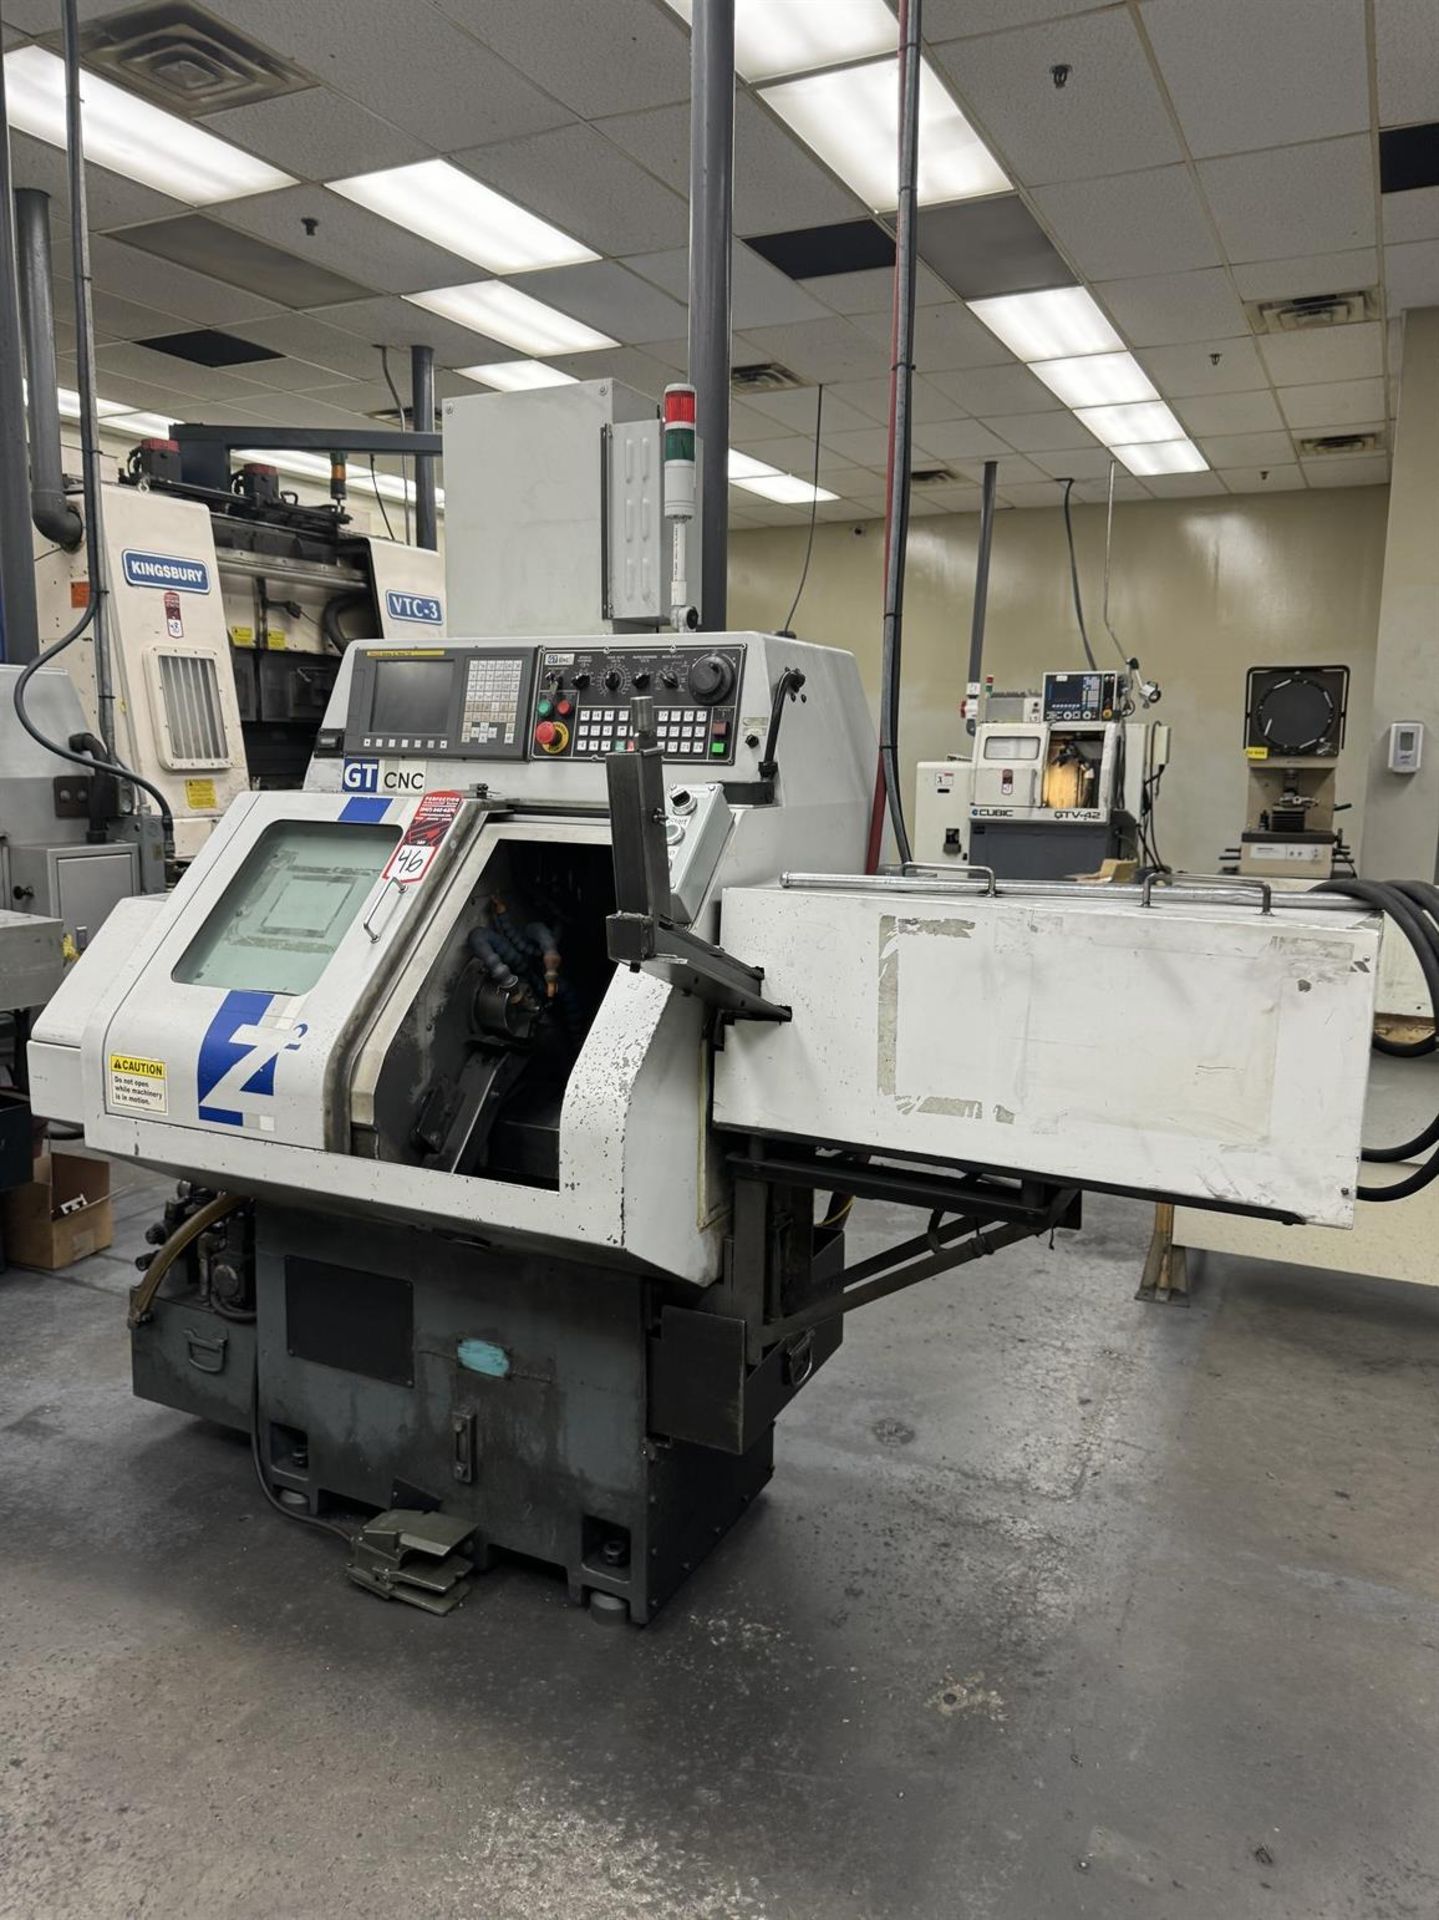 CUBIC GT Z2 CNC Gang Tool Lathe, s/n na, Fanuc Series Oi Mate-TD Control, 60mm Turning Dia, 120mm Sw